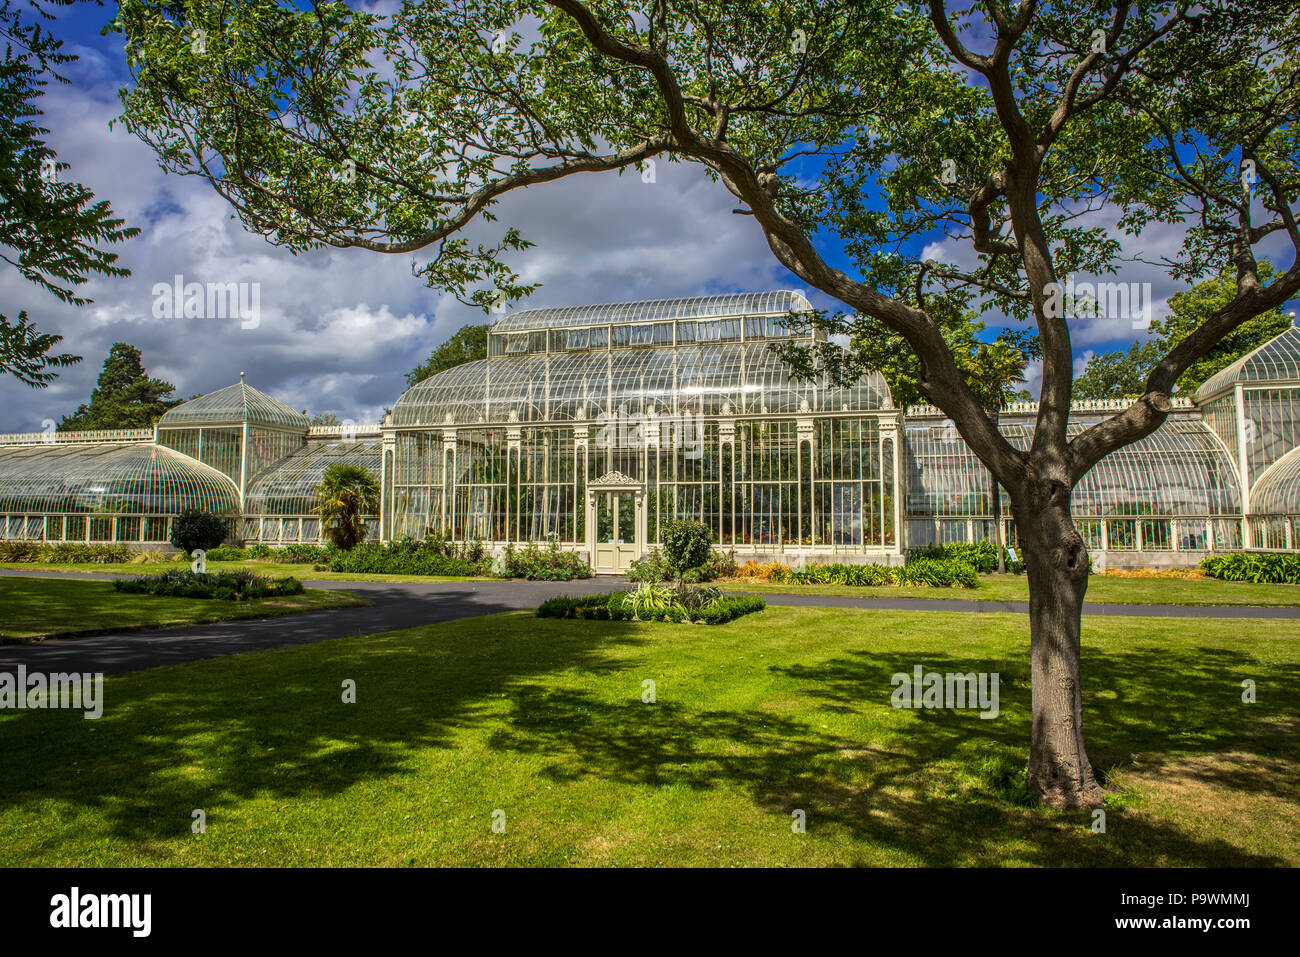 Greenhouse from 1849 in the botanical garden, also called Curvilinear Range, architect Richard Turner, Dublin, Ireland Stock Photo